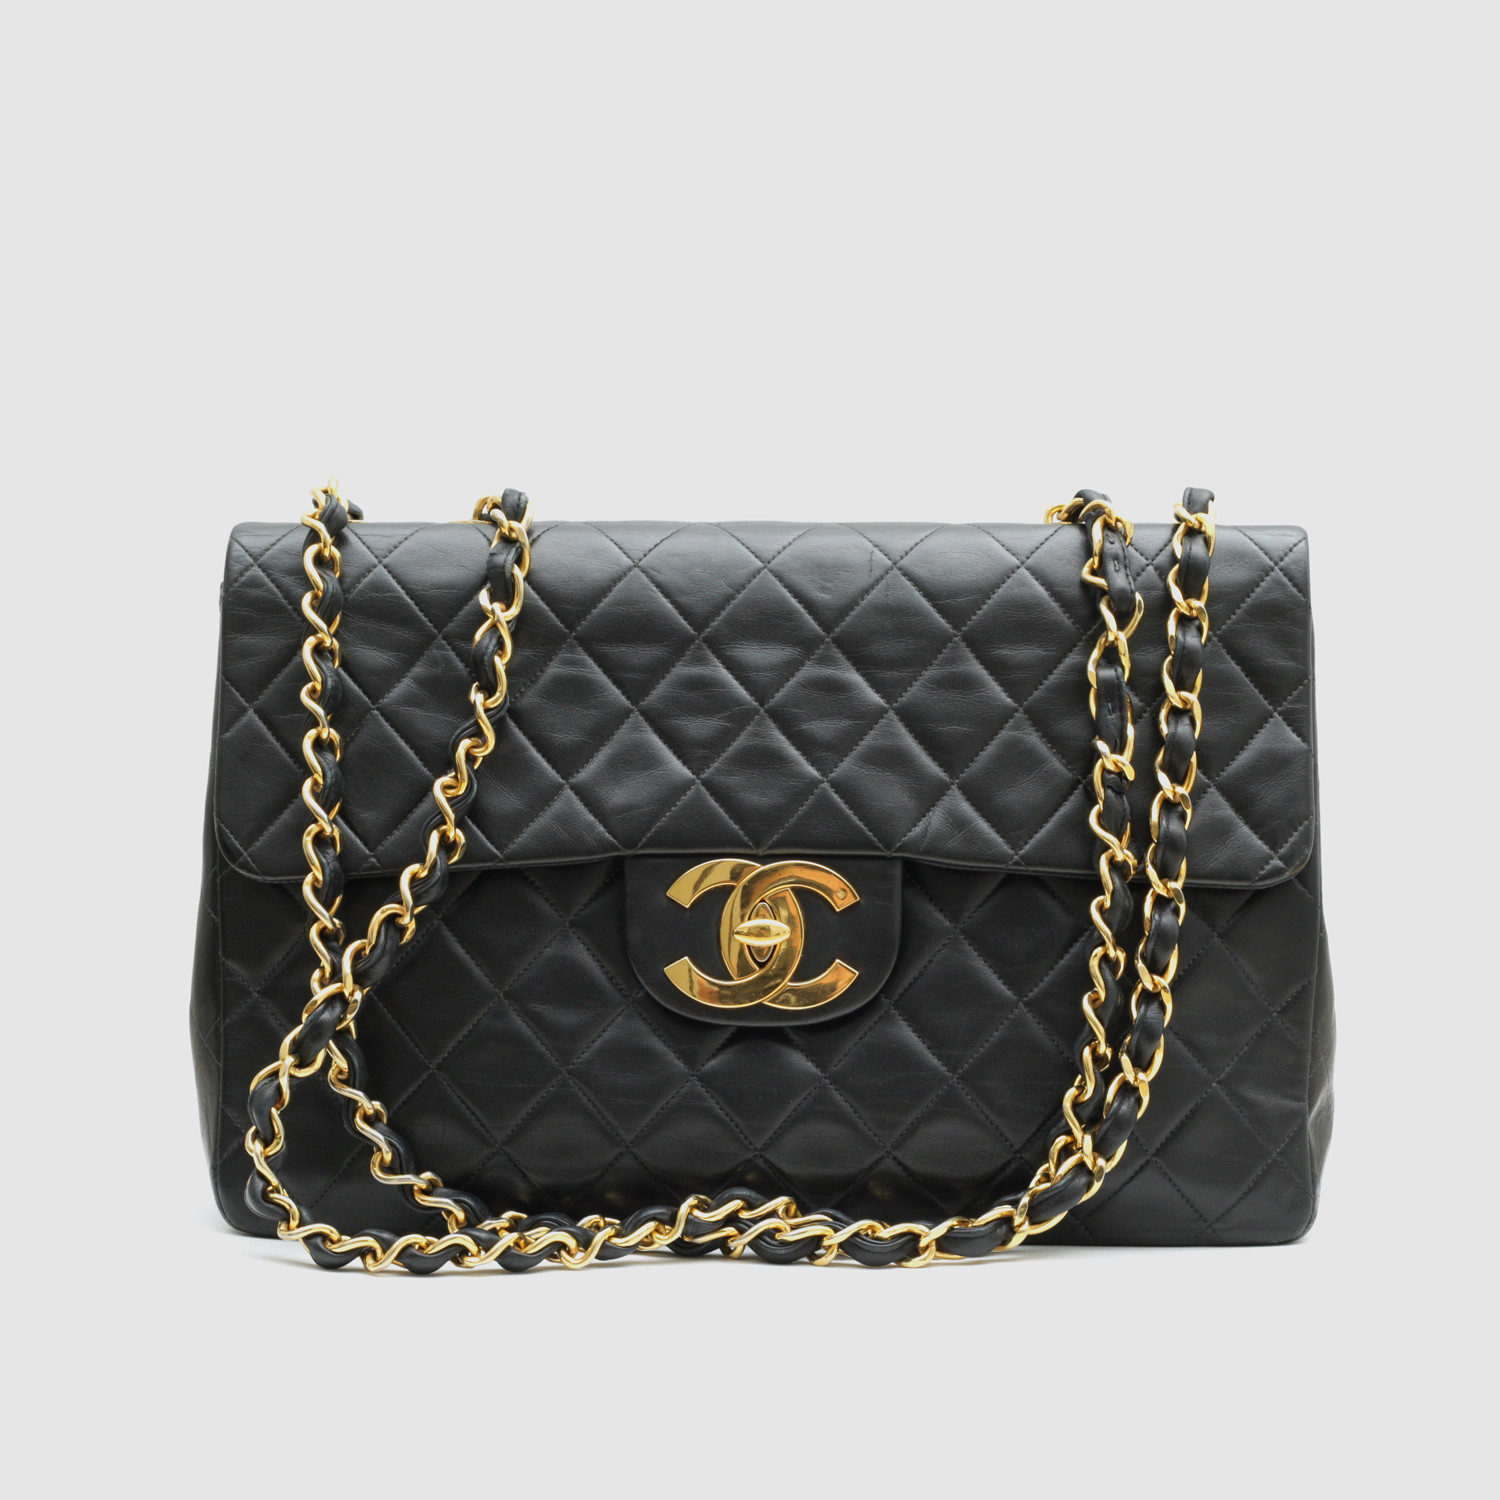 Chanel Classic Large Jumbo Flap Bag // Black Quilted Lambskin Vintage